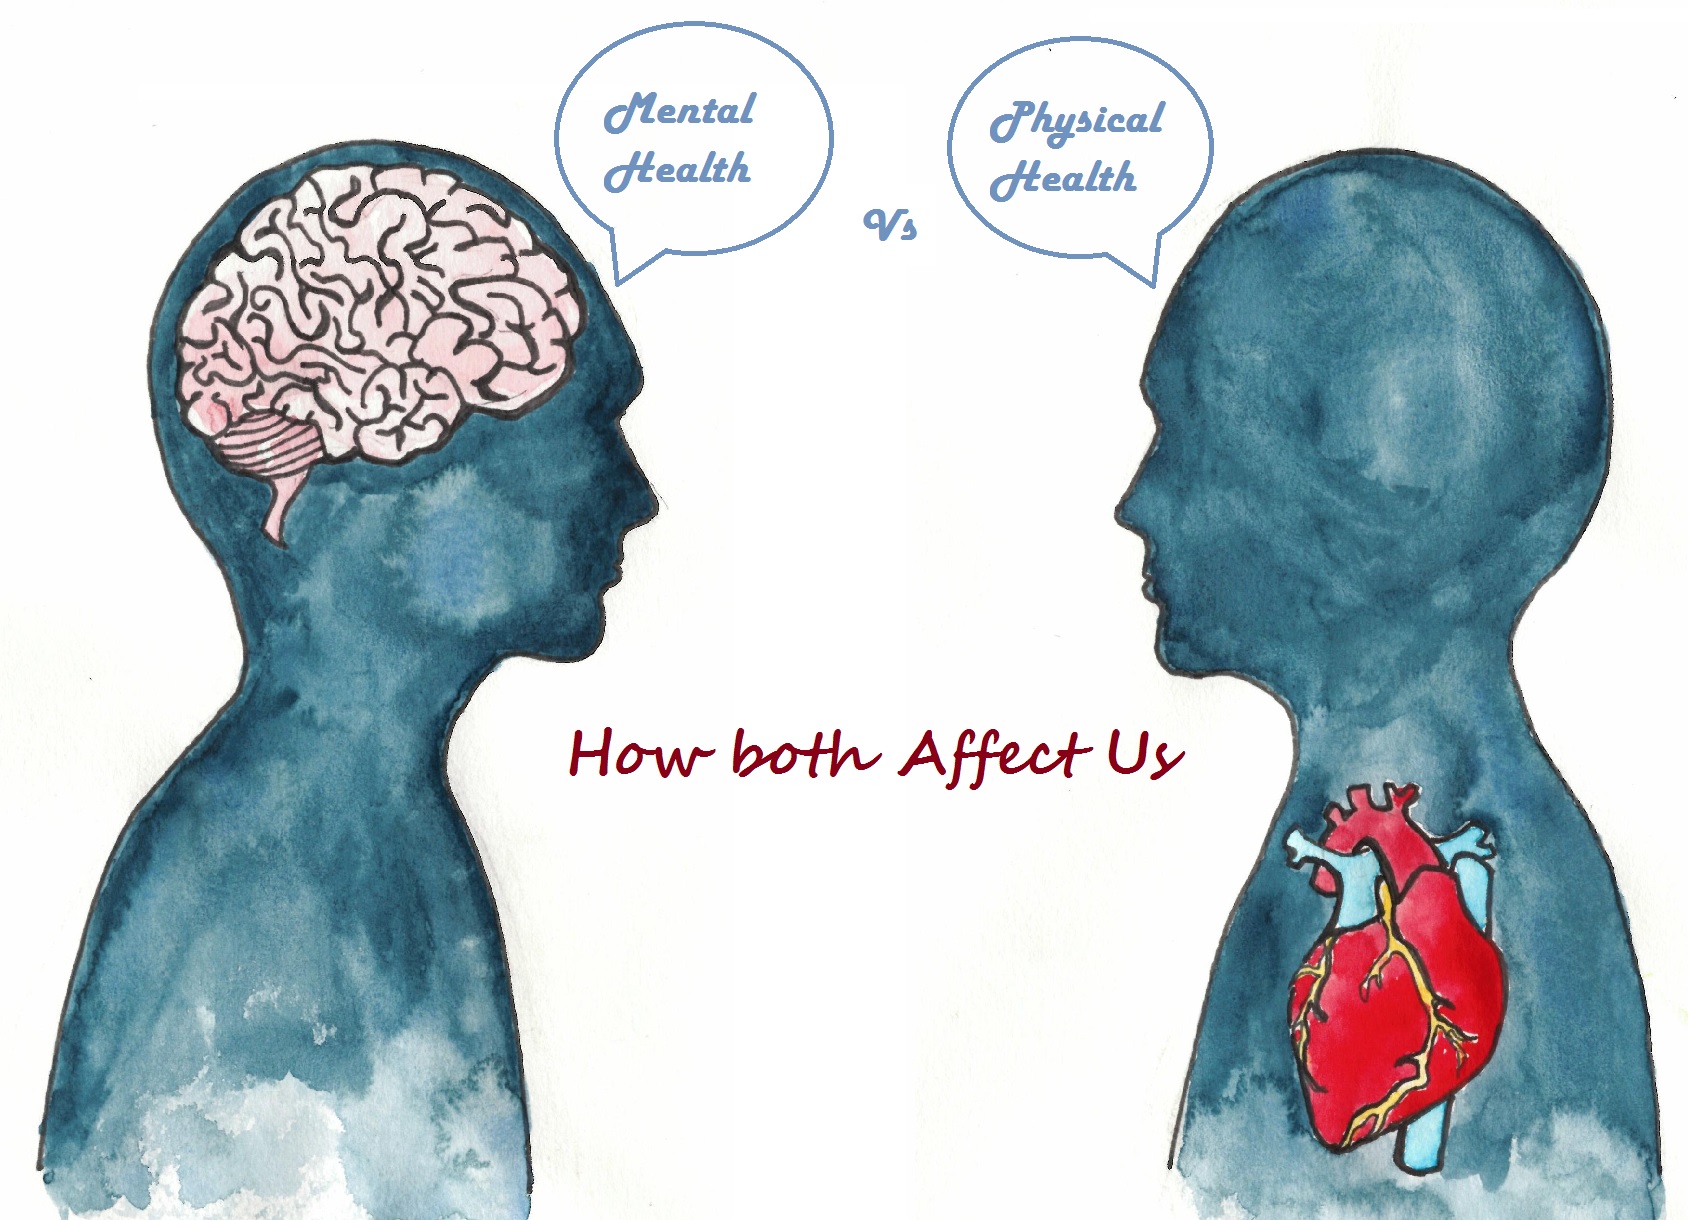 Mental Health Vs Physical Health How both Affect Us